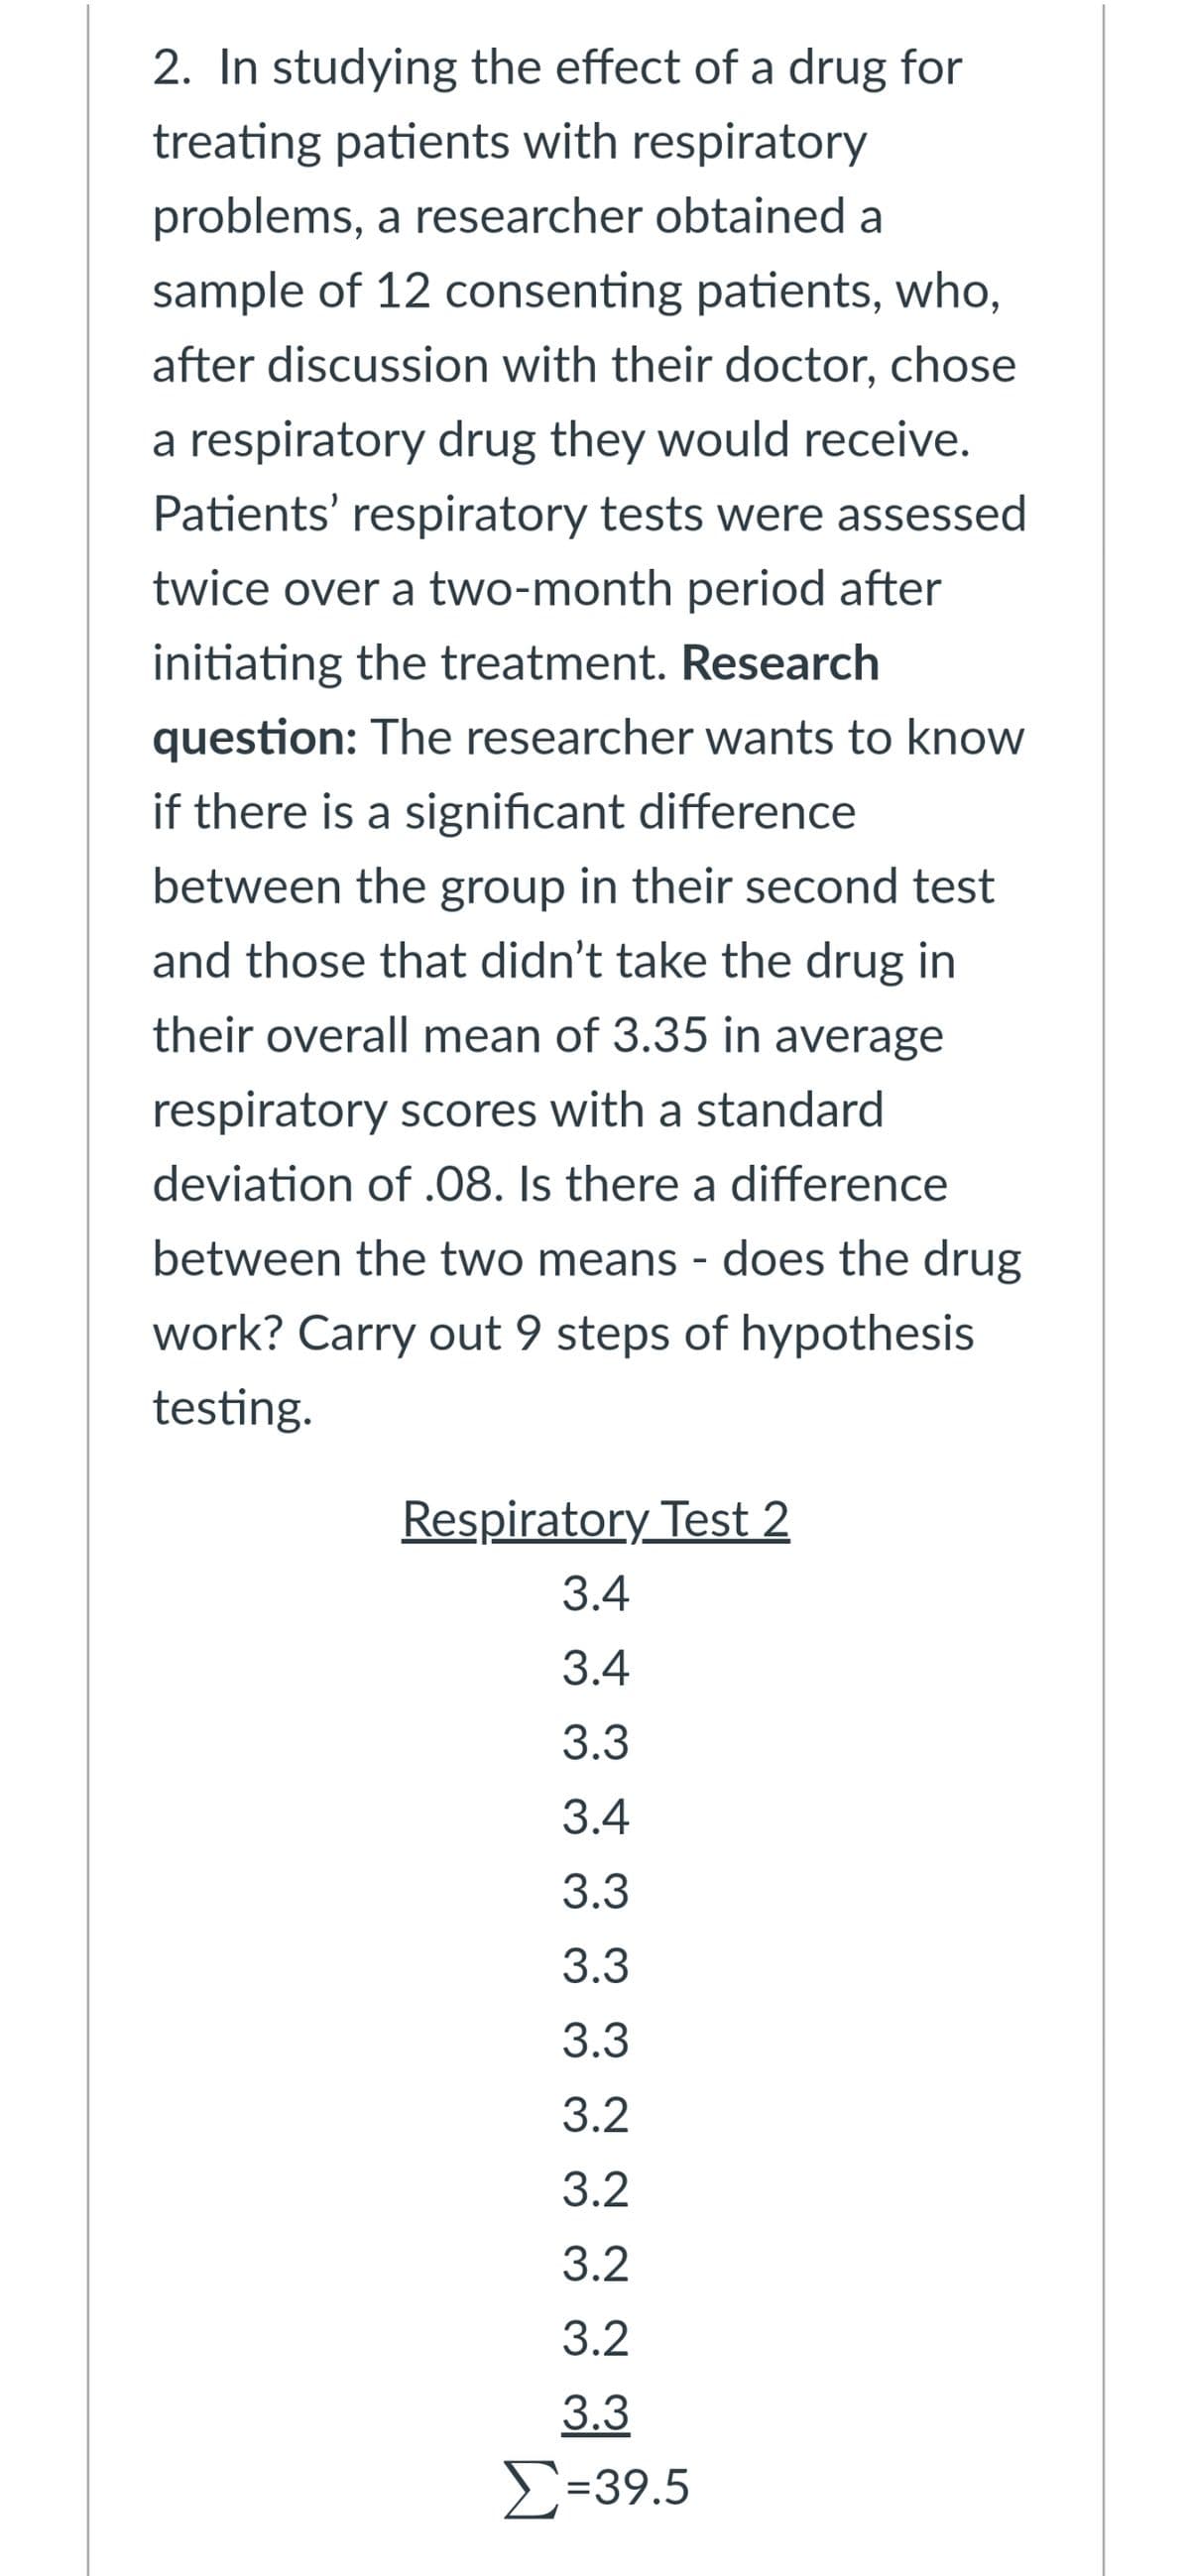 2. In studying the effect of a drug for
treating patients with respiratory
problems, a researcher obtained a
sample of 12 consenting patients, who,
after discussion with their doctor, chose
a respiratory drug they would receive.
Patients' respiratory tests were assessed
twice over a two-month period after
initiating the treatment. Research
question: The researcher wants to know
if there is a significant difference
between the group in their second test
and those that didn't take the drug in
their overall mean of 3.35 in average
respiratory scores with a standard
deviation of .08. Is there a difference
between the two means - does the drug
work? Carry out 9 steps of hypothesis
testing.
Respiratory Test 2
3.4
3.4
3.3
3.4
3.3
3.3
3.3
3.2
3.2
3.2
3.2
3.3
Σ-39.5
